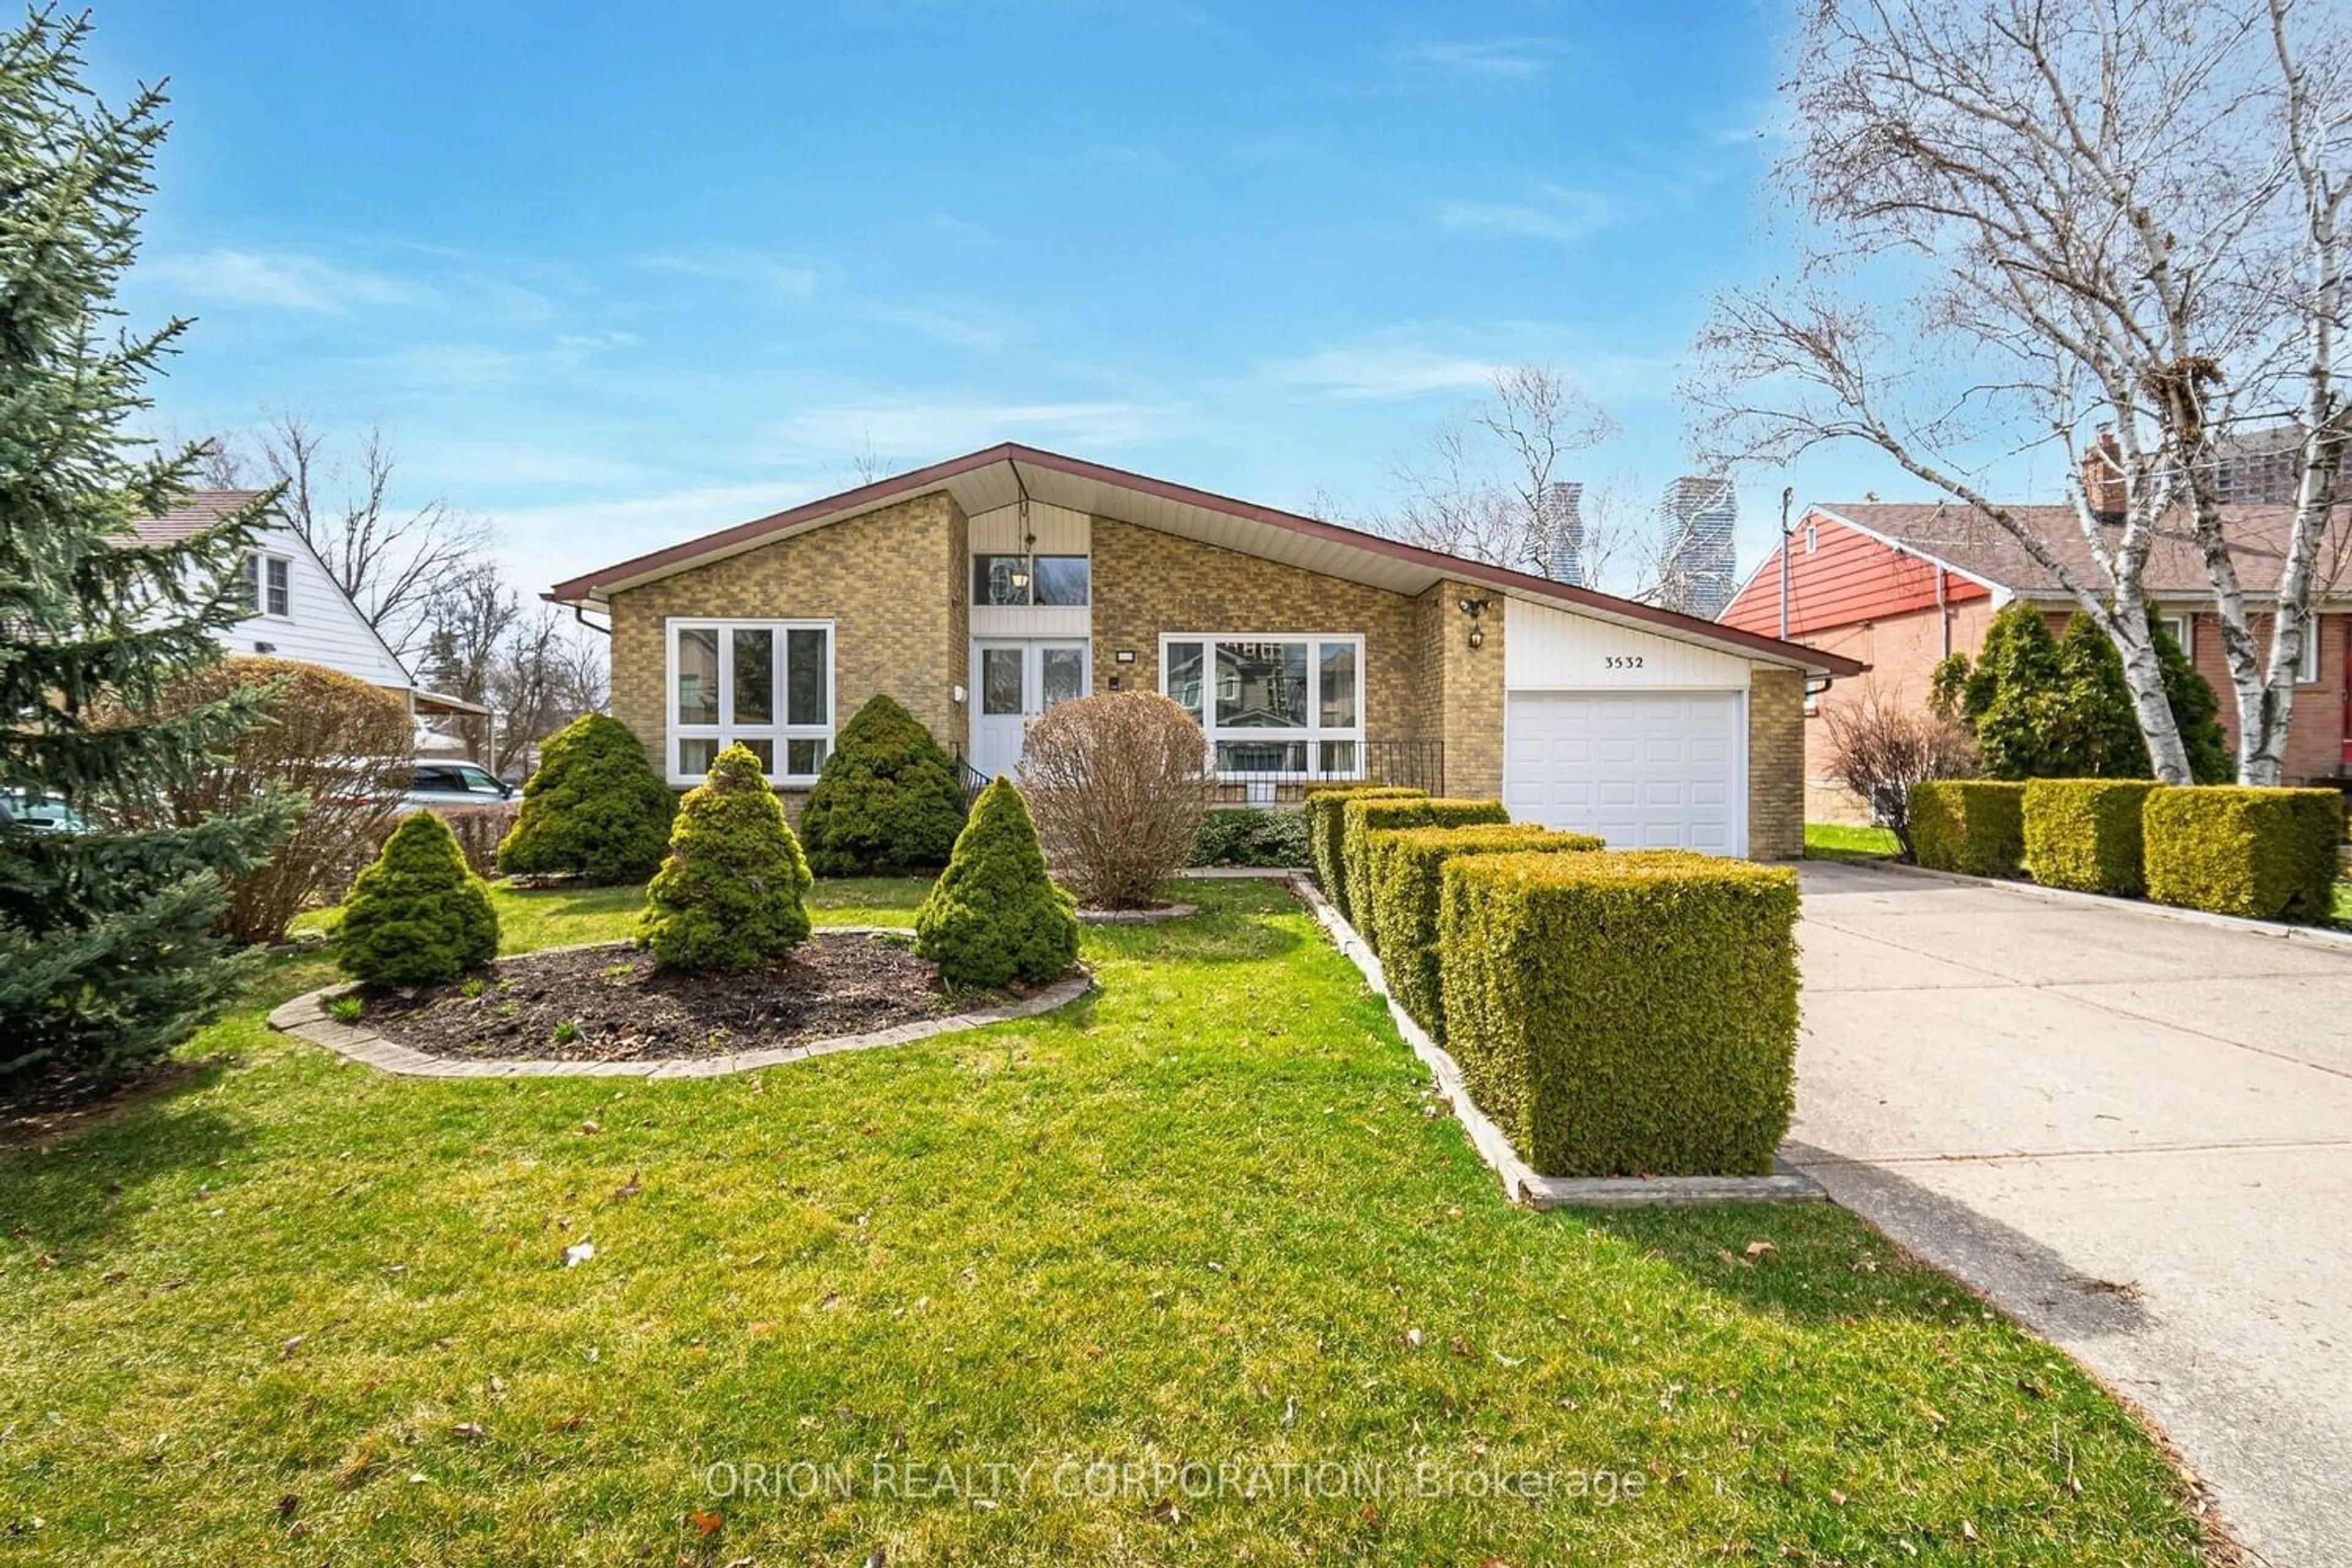 Frontside or backside of a home for 3532 Joan Dr, Mississauga Ontario L5B 1T8